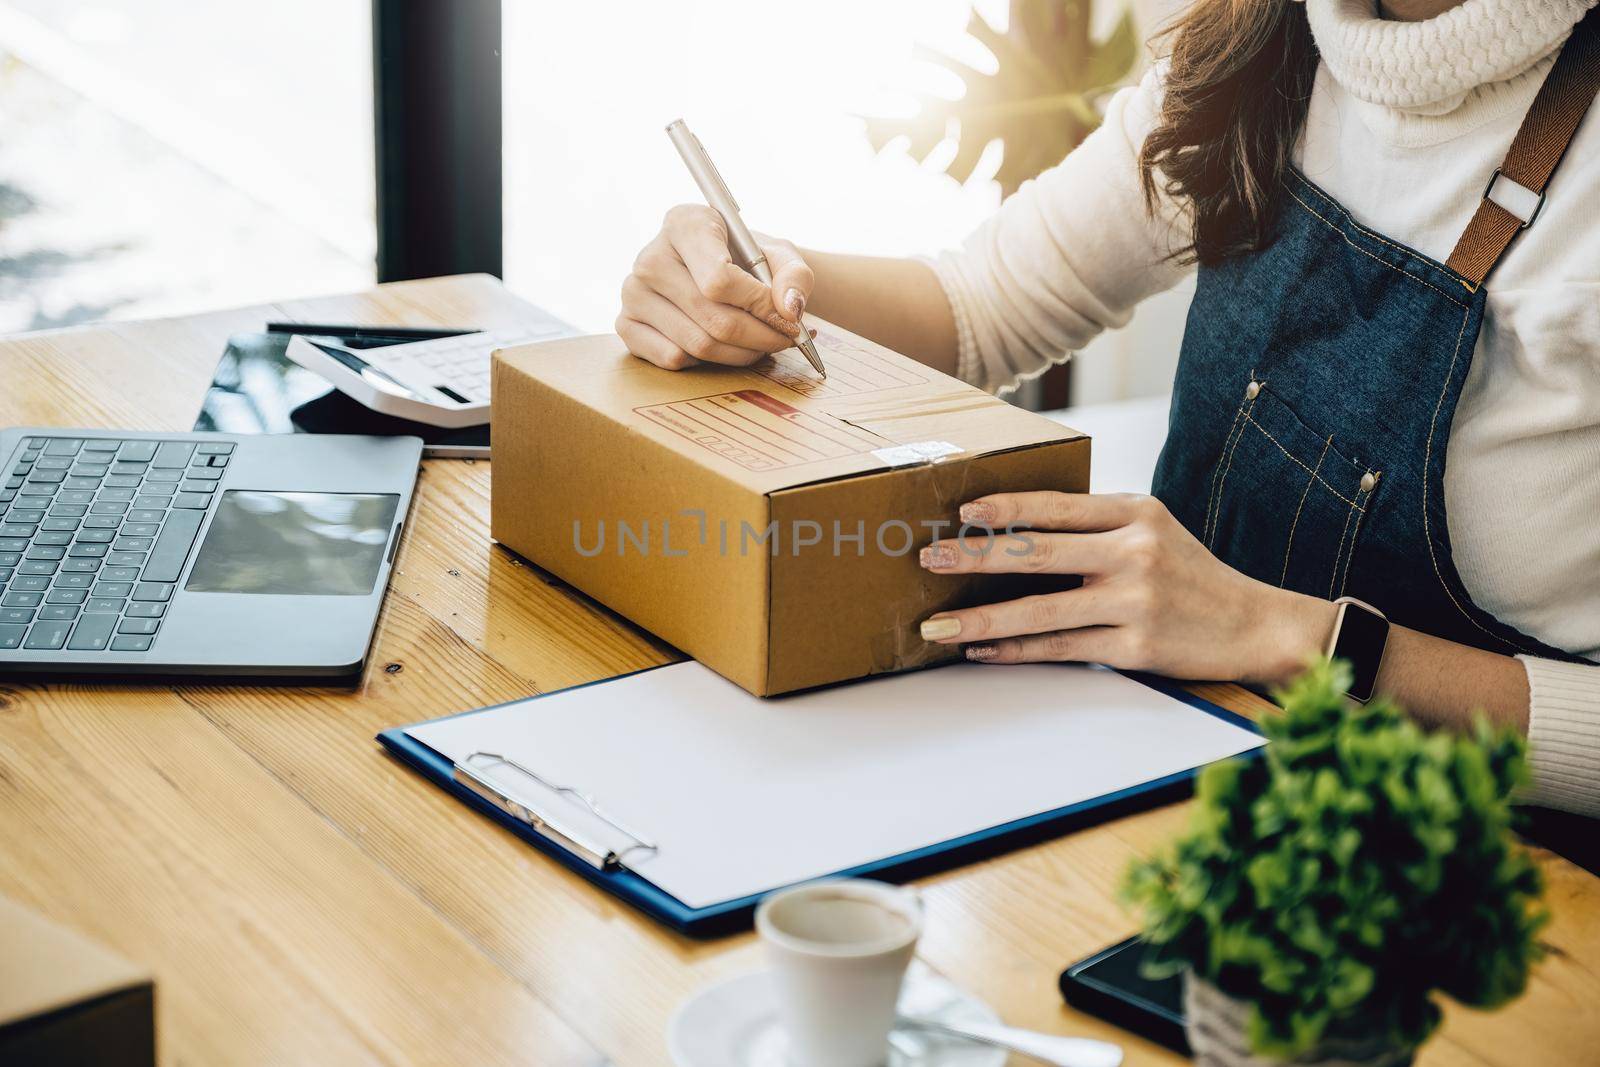 Business owners use pens to write on parcel boxes and use computers to check online orders to prepare packaged boxes. Pack products for delivery to customers